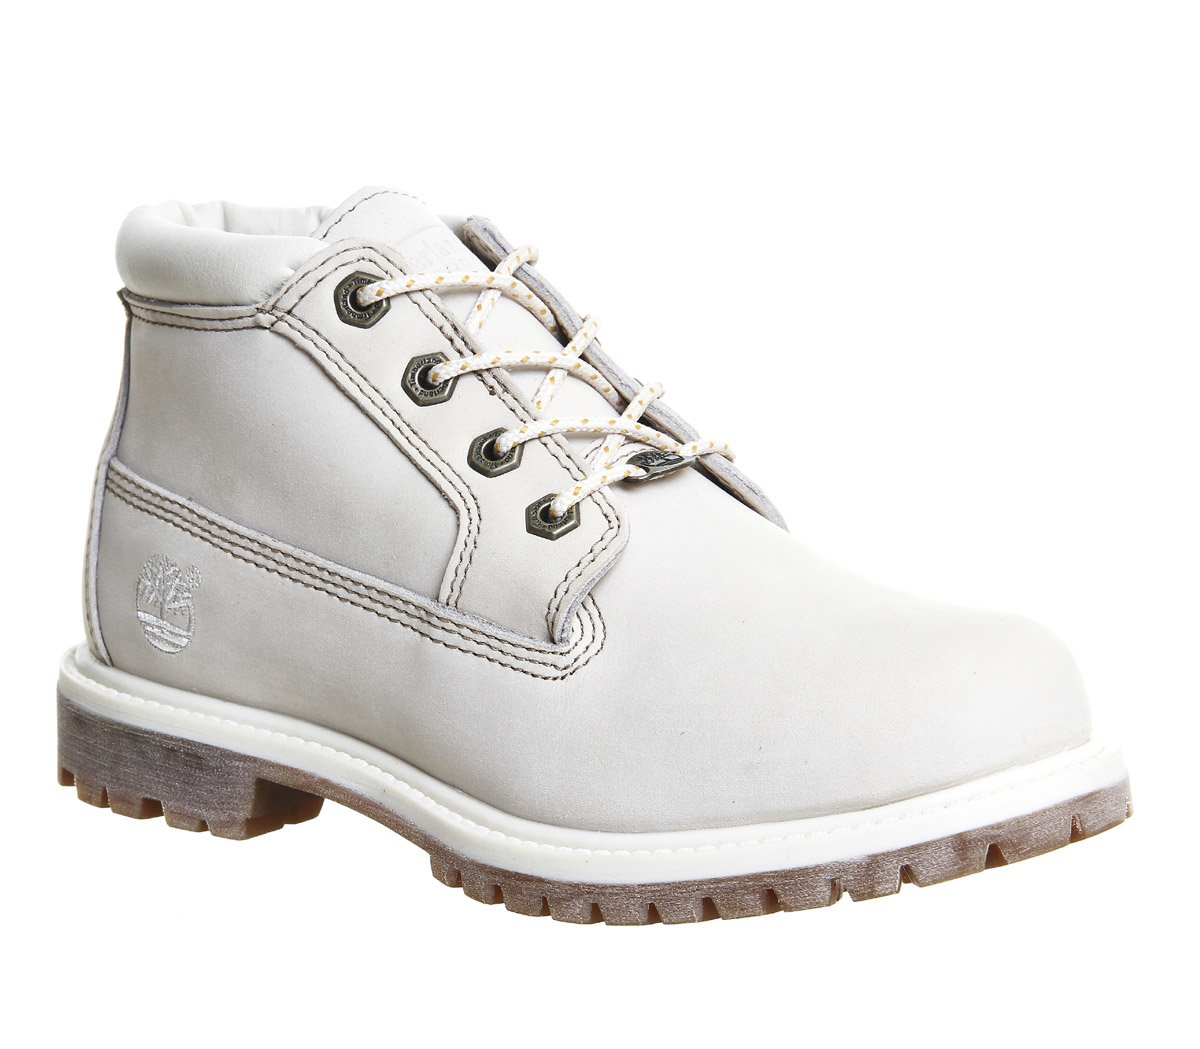 Timberland Nellie Chukka Double Waterproof Boots in White | Lyst